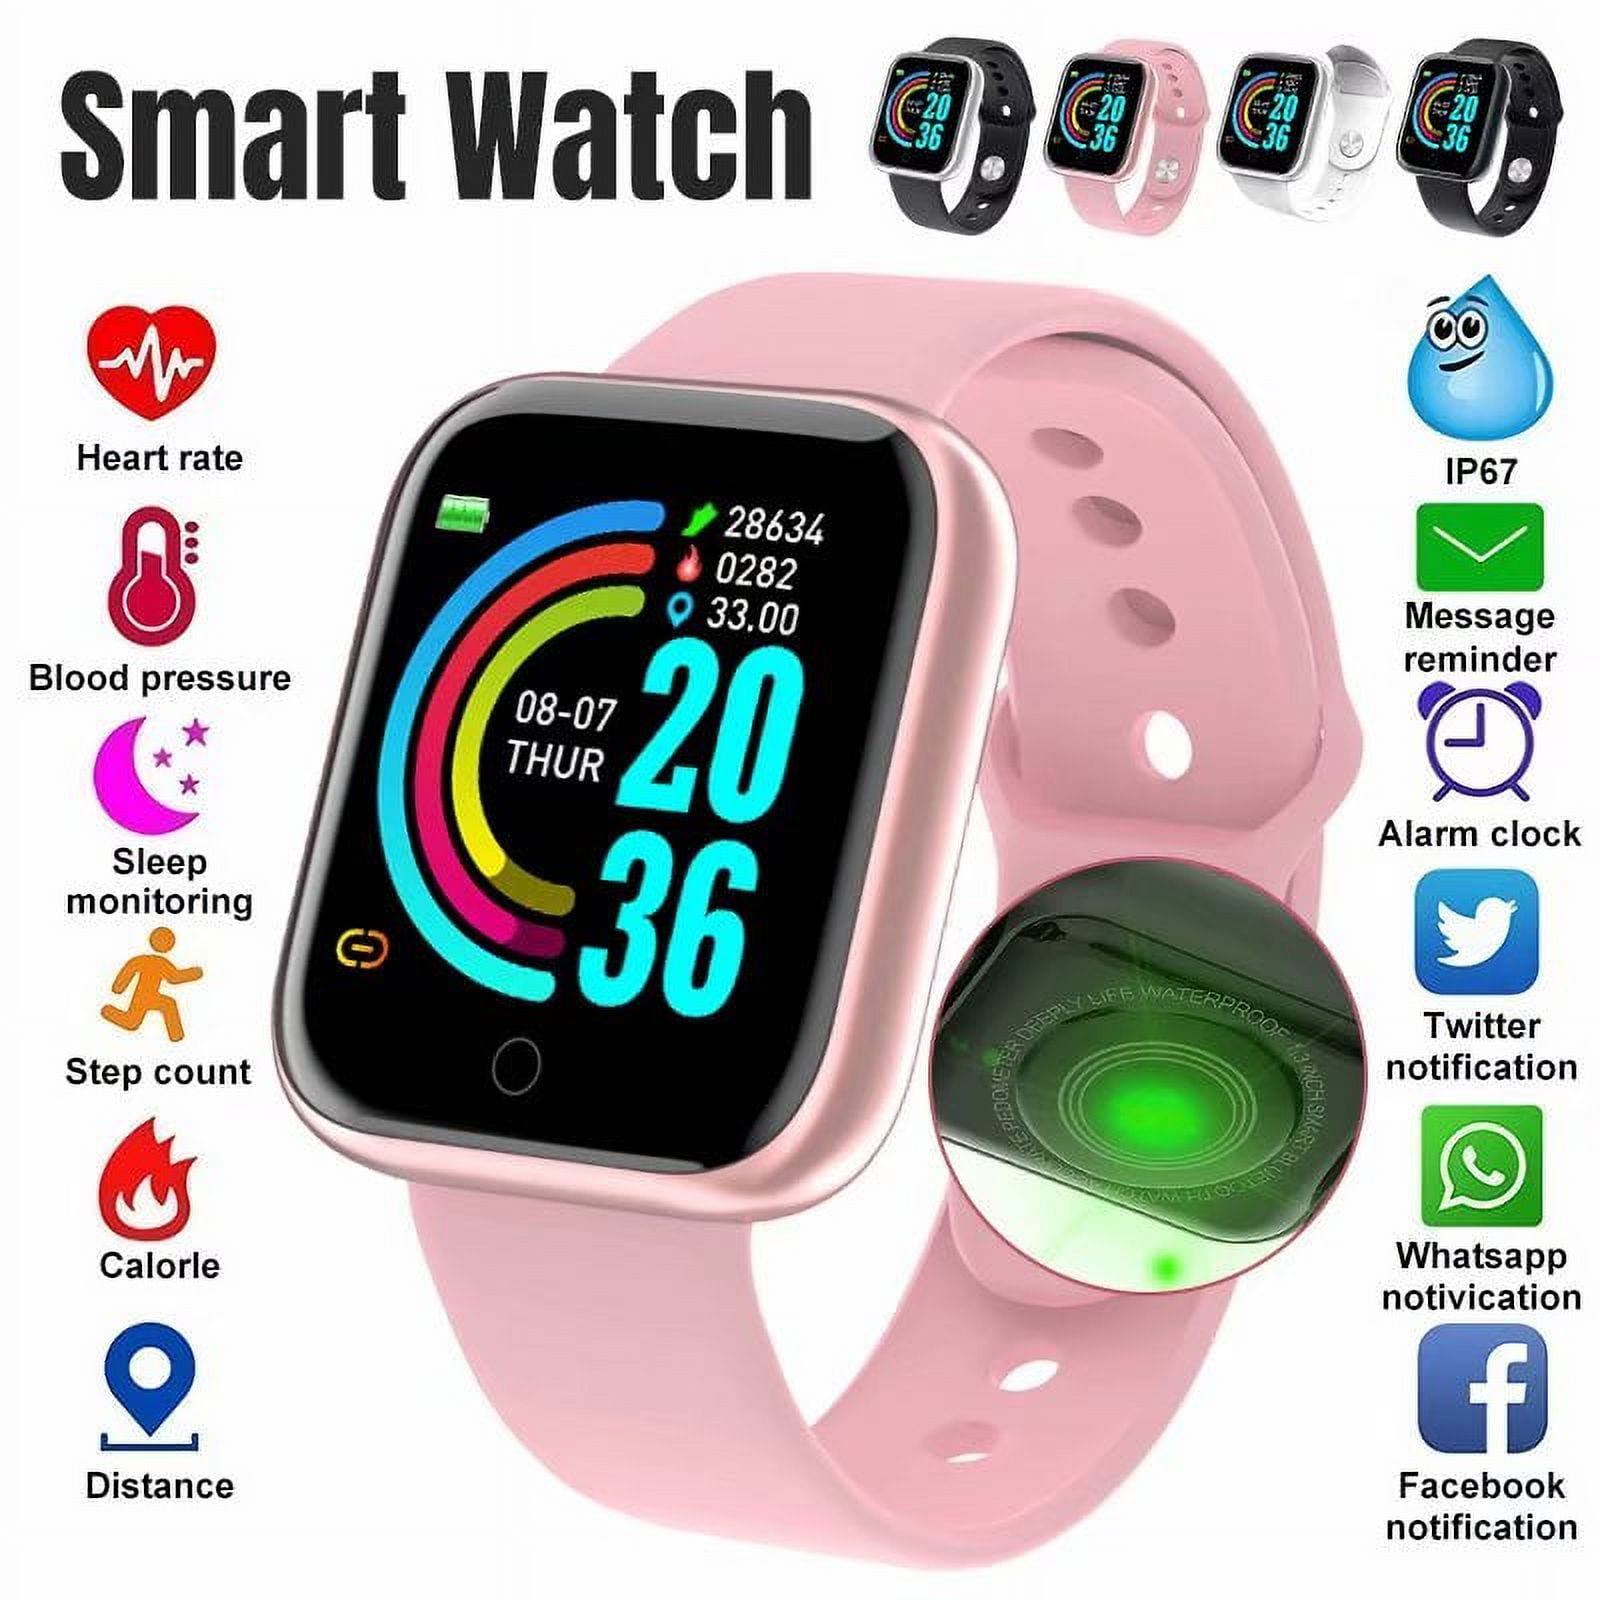 Fitness Tracker Blood Oxygen SpO2 Heart Rate Monitor Blood Pressure Fitness  Activity Tracker with Low O2 Reminder, IP68 Waterproof Smart Watch with HRV  Sleep Health Monitor Smartwatch for Android iOS - Newegg.com